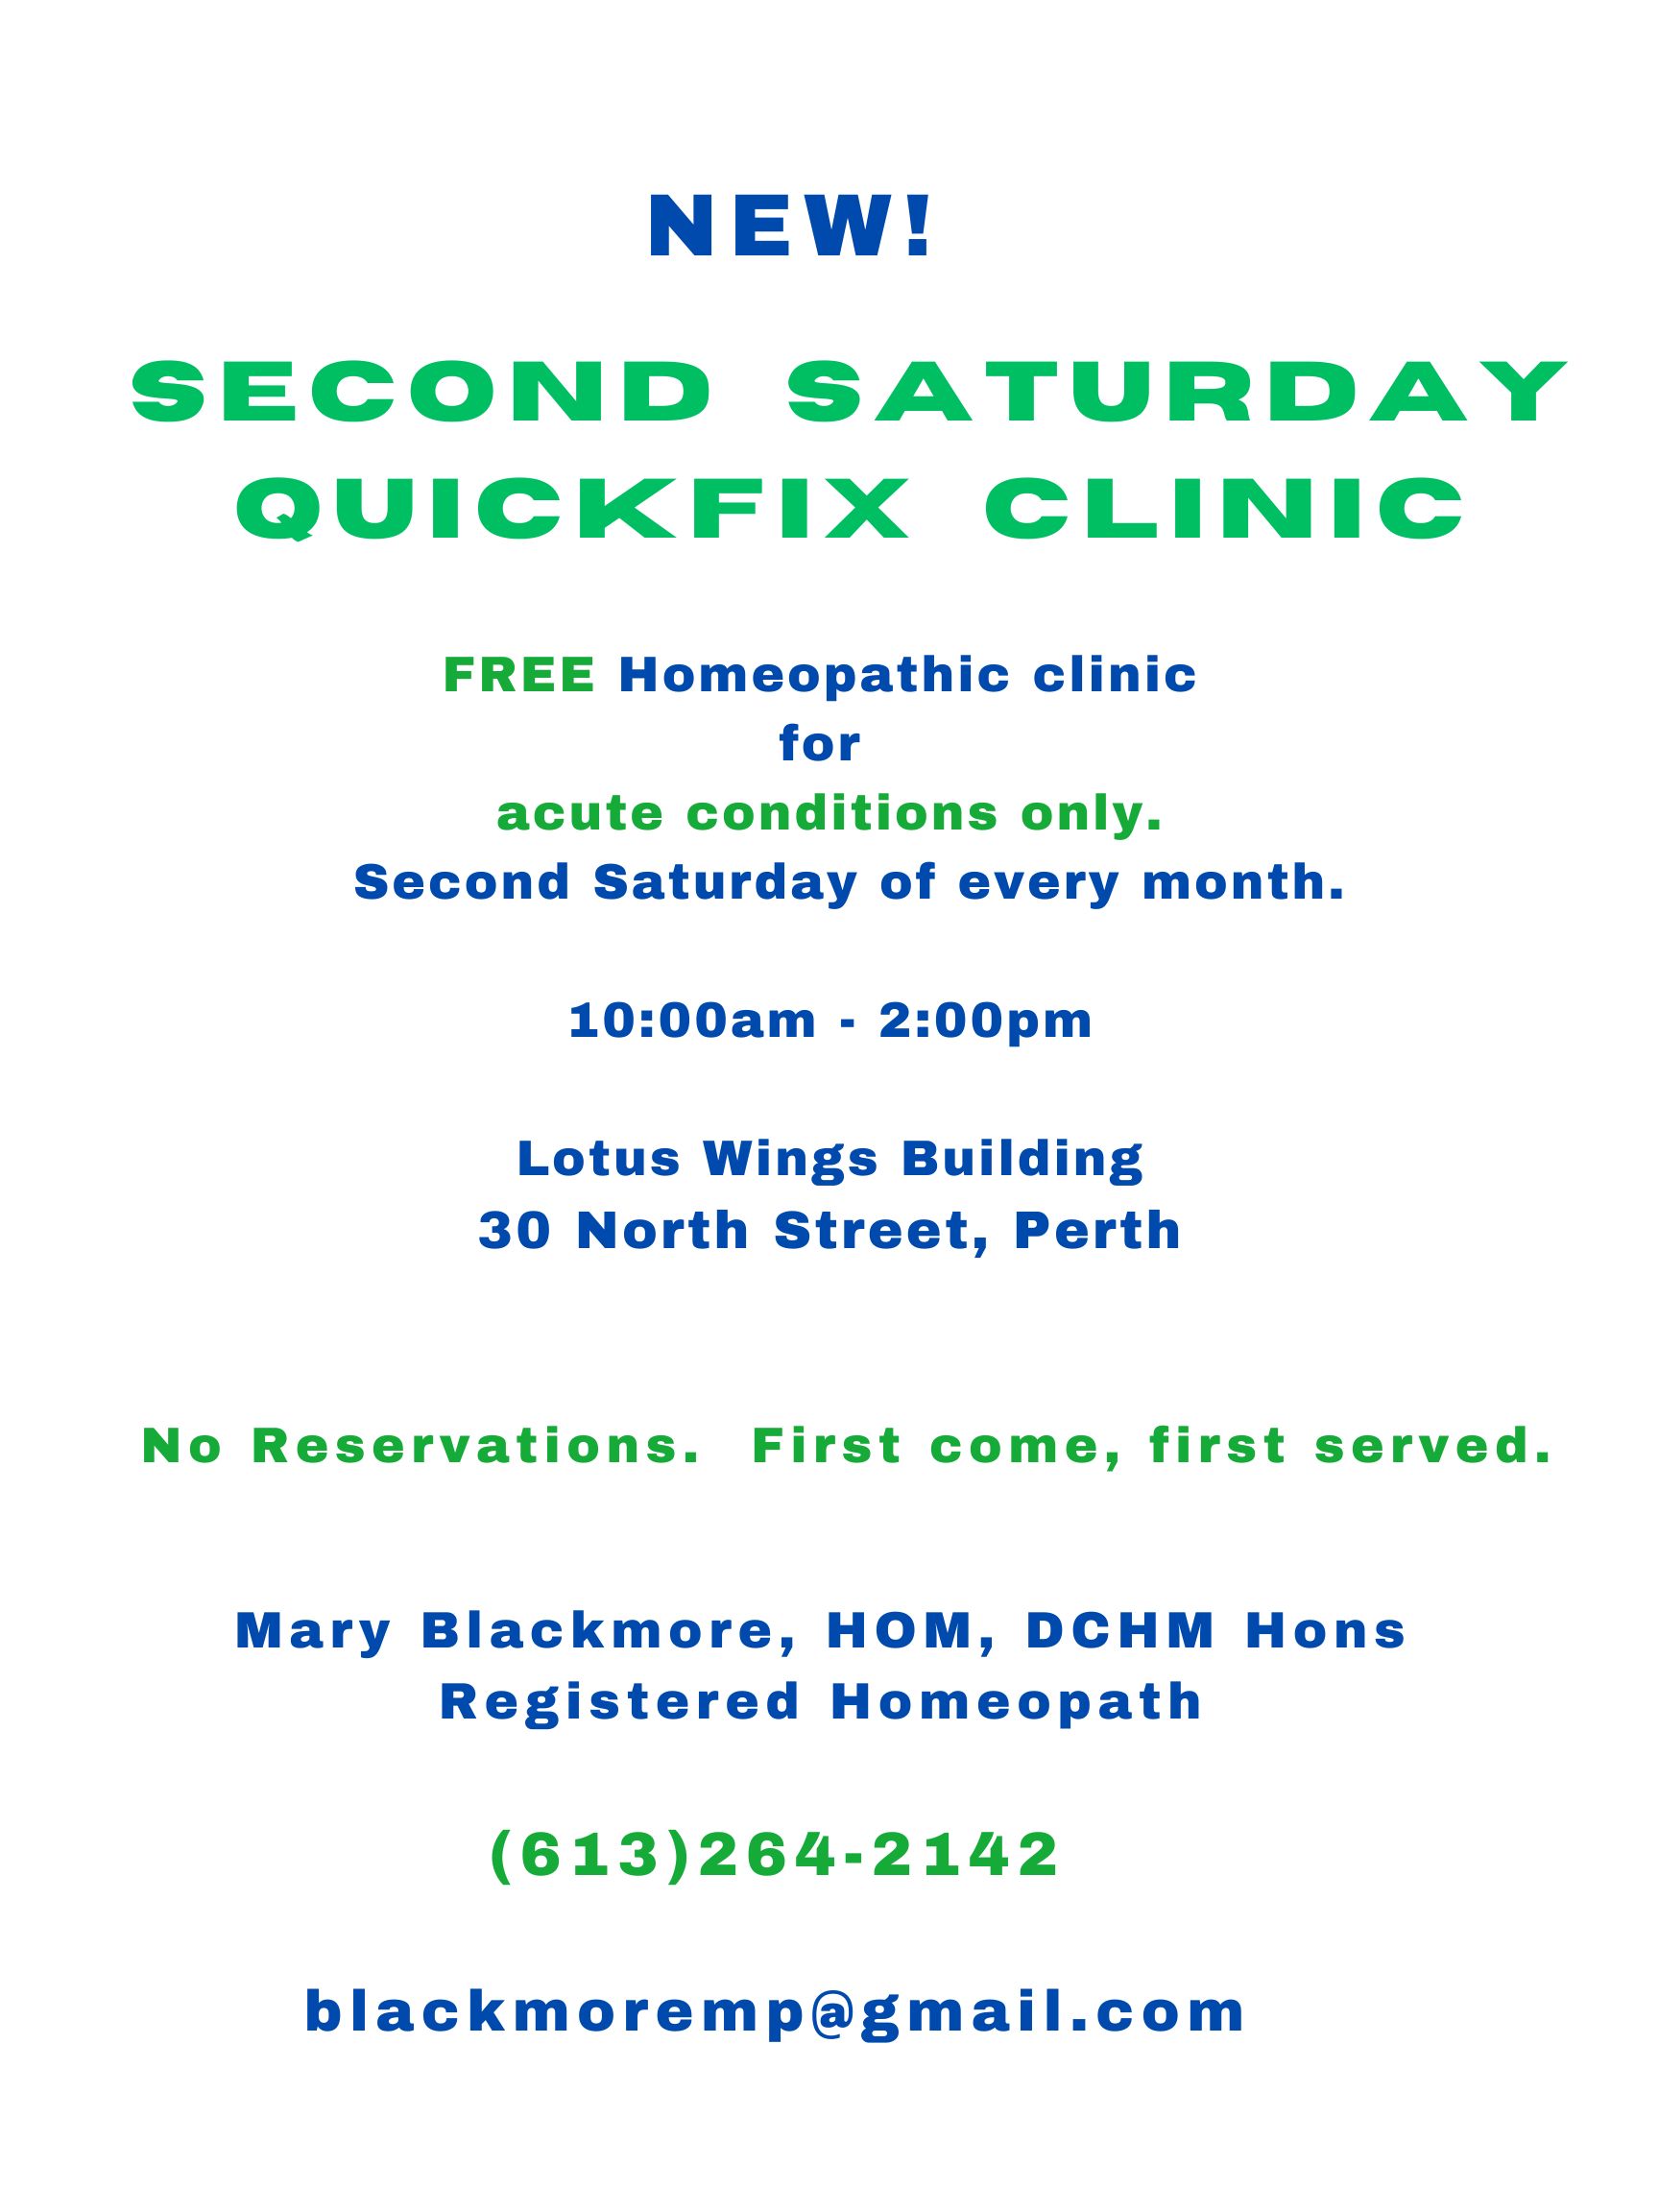  Second Saturday Quick Fix Clinic with Mary Blackmore